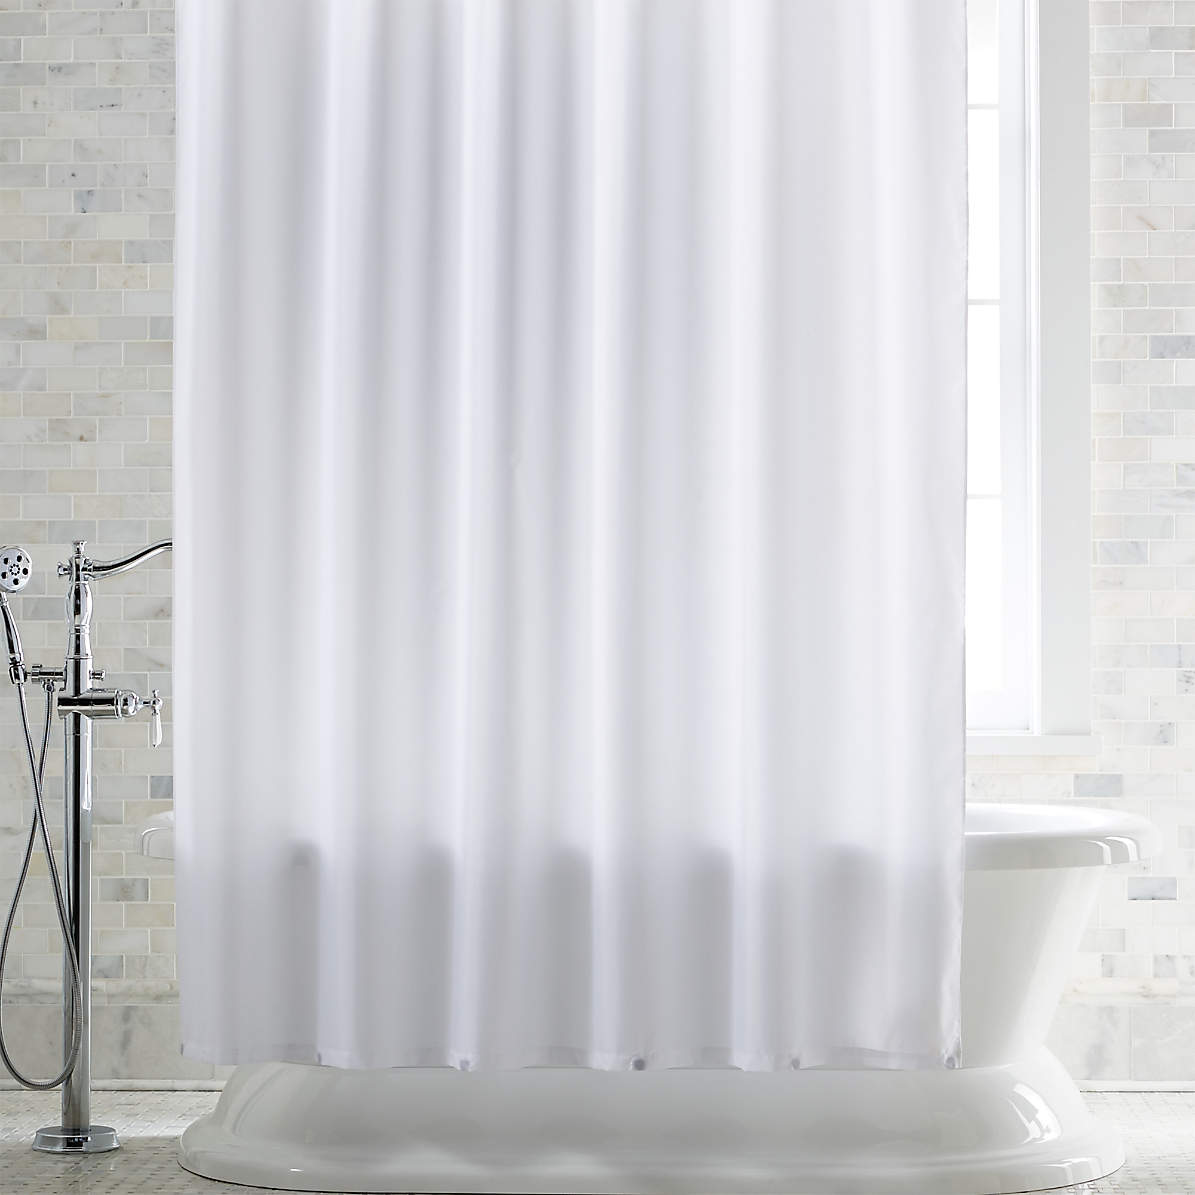 White Shower Curtain Liner With Magnets, Does Cotton Shower Curtains Need Liner